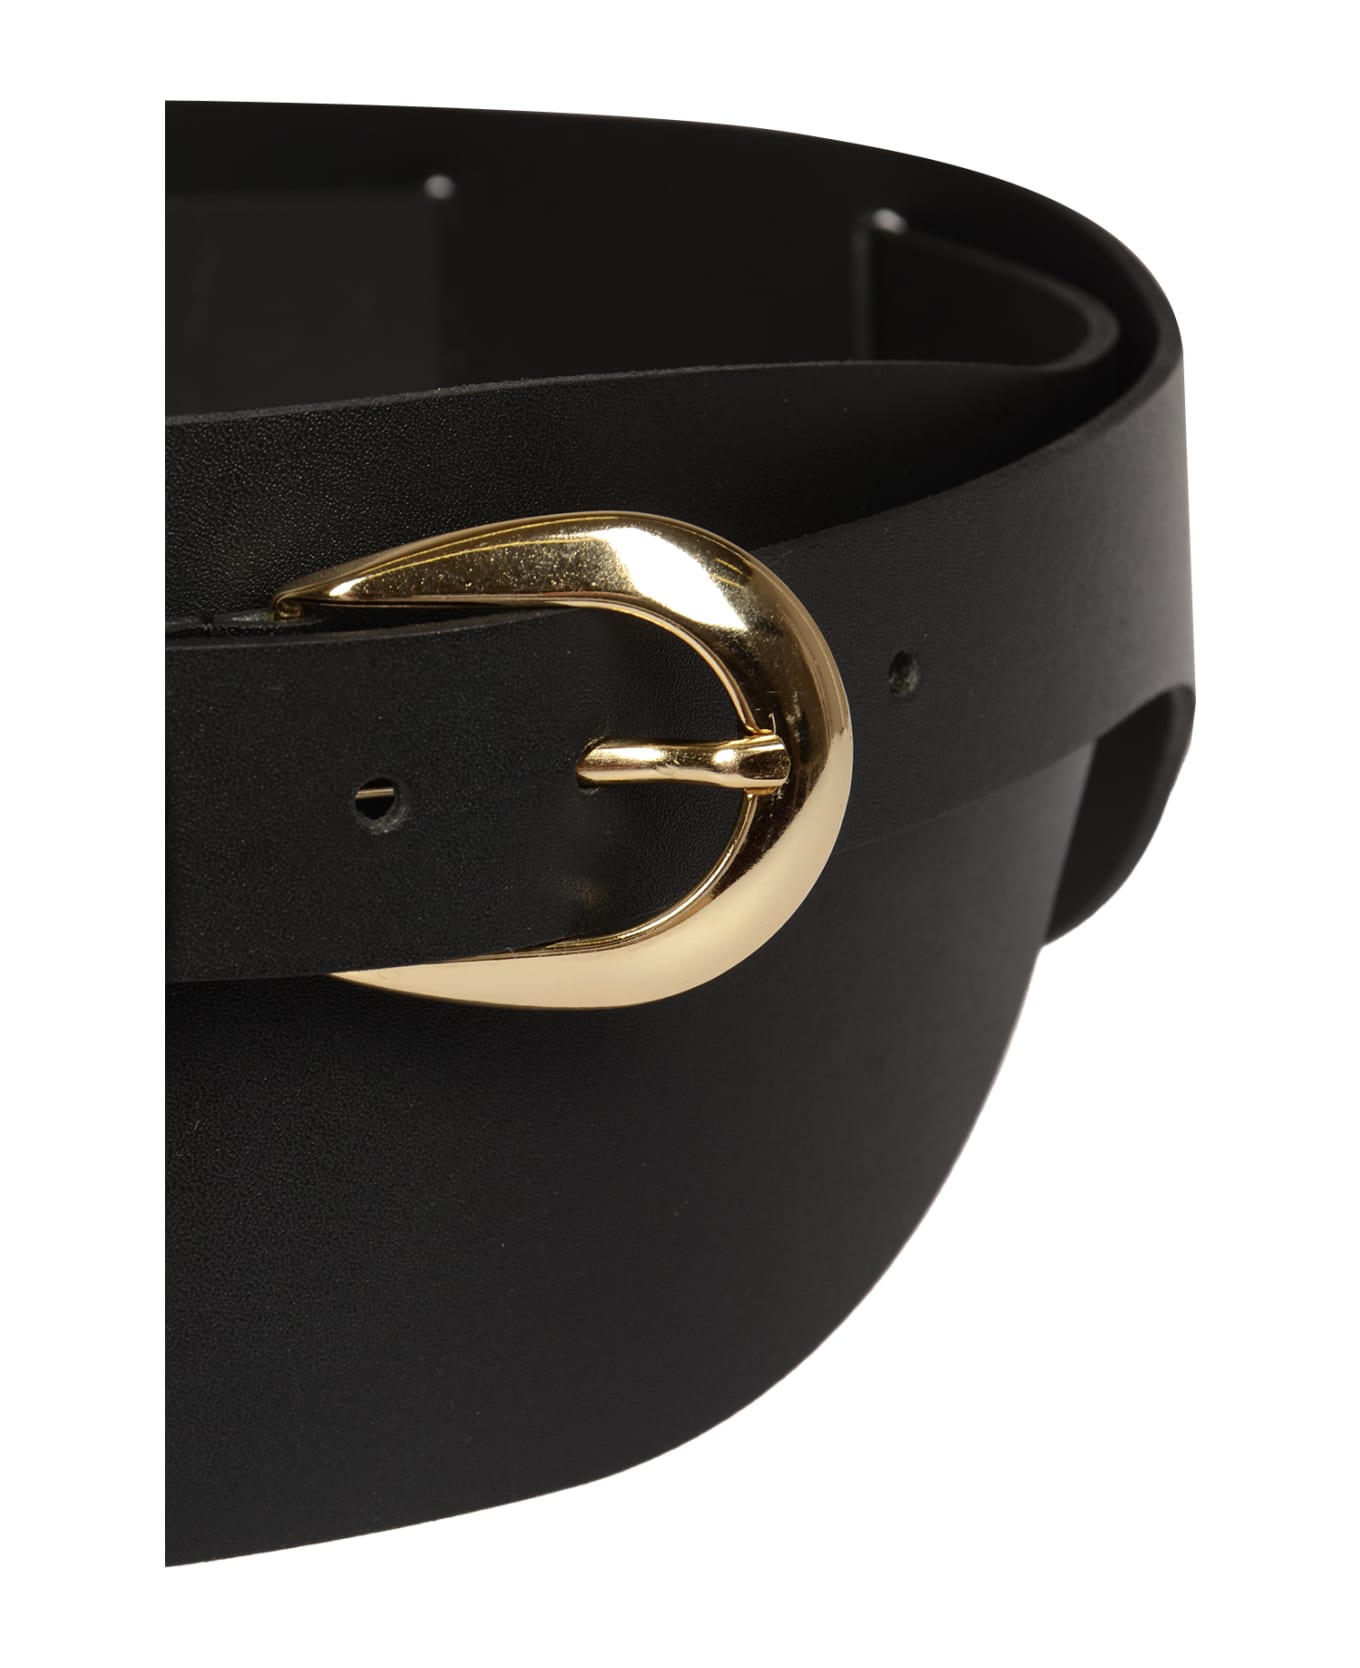 Federica Tosi Thick Wrapped Belt - Black